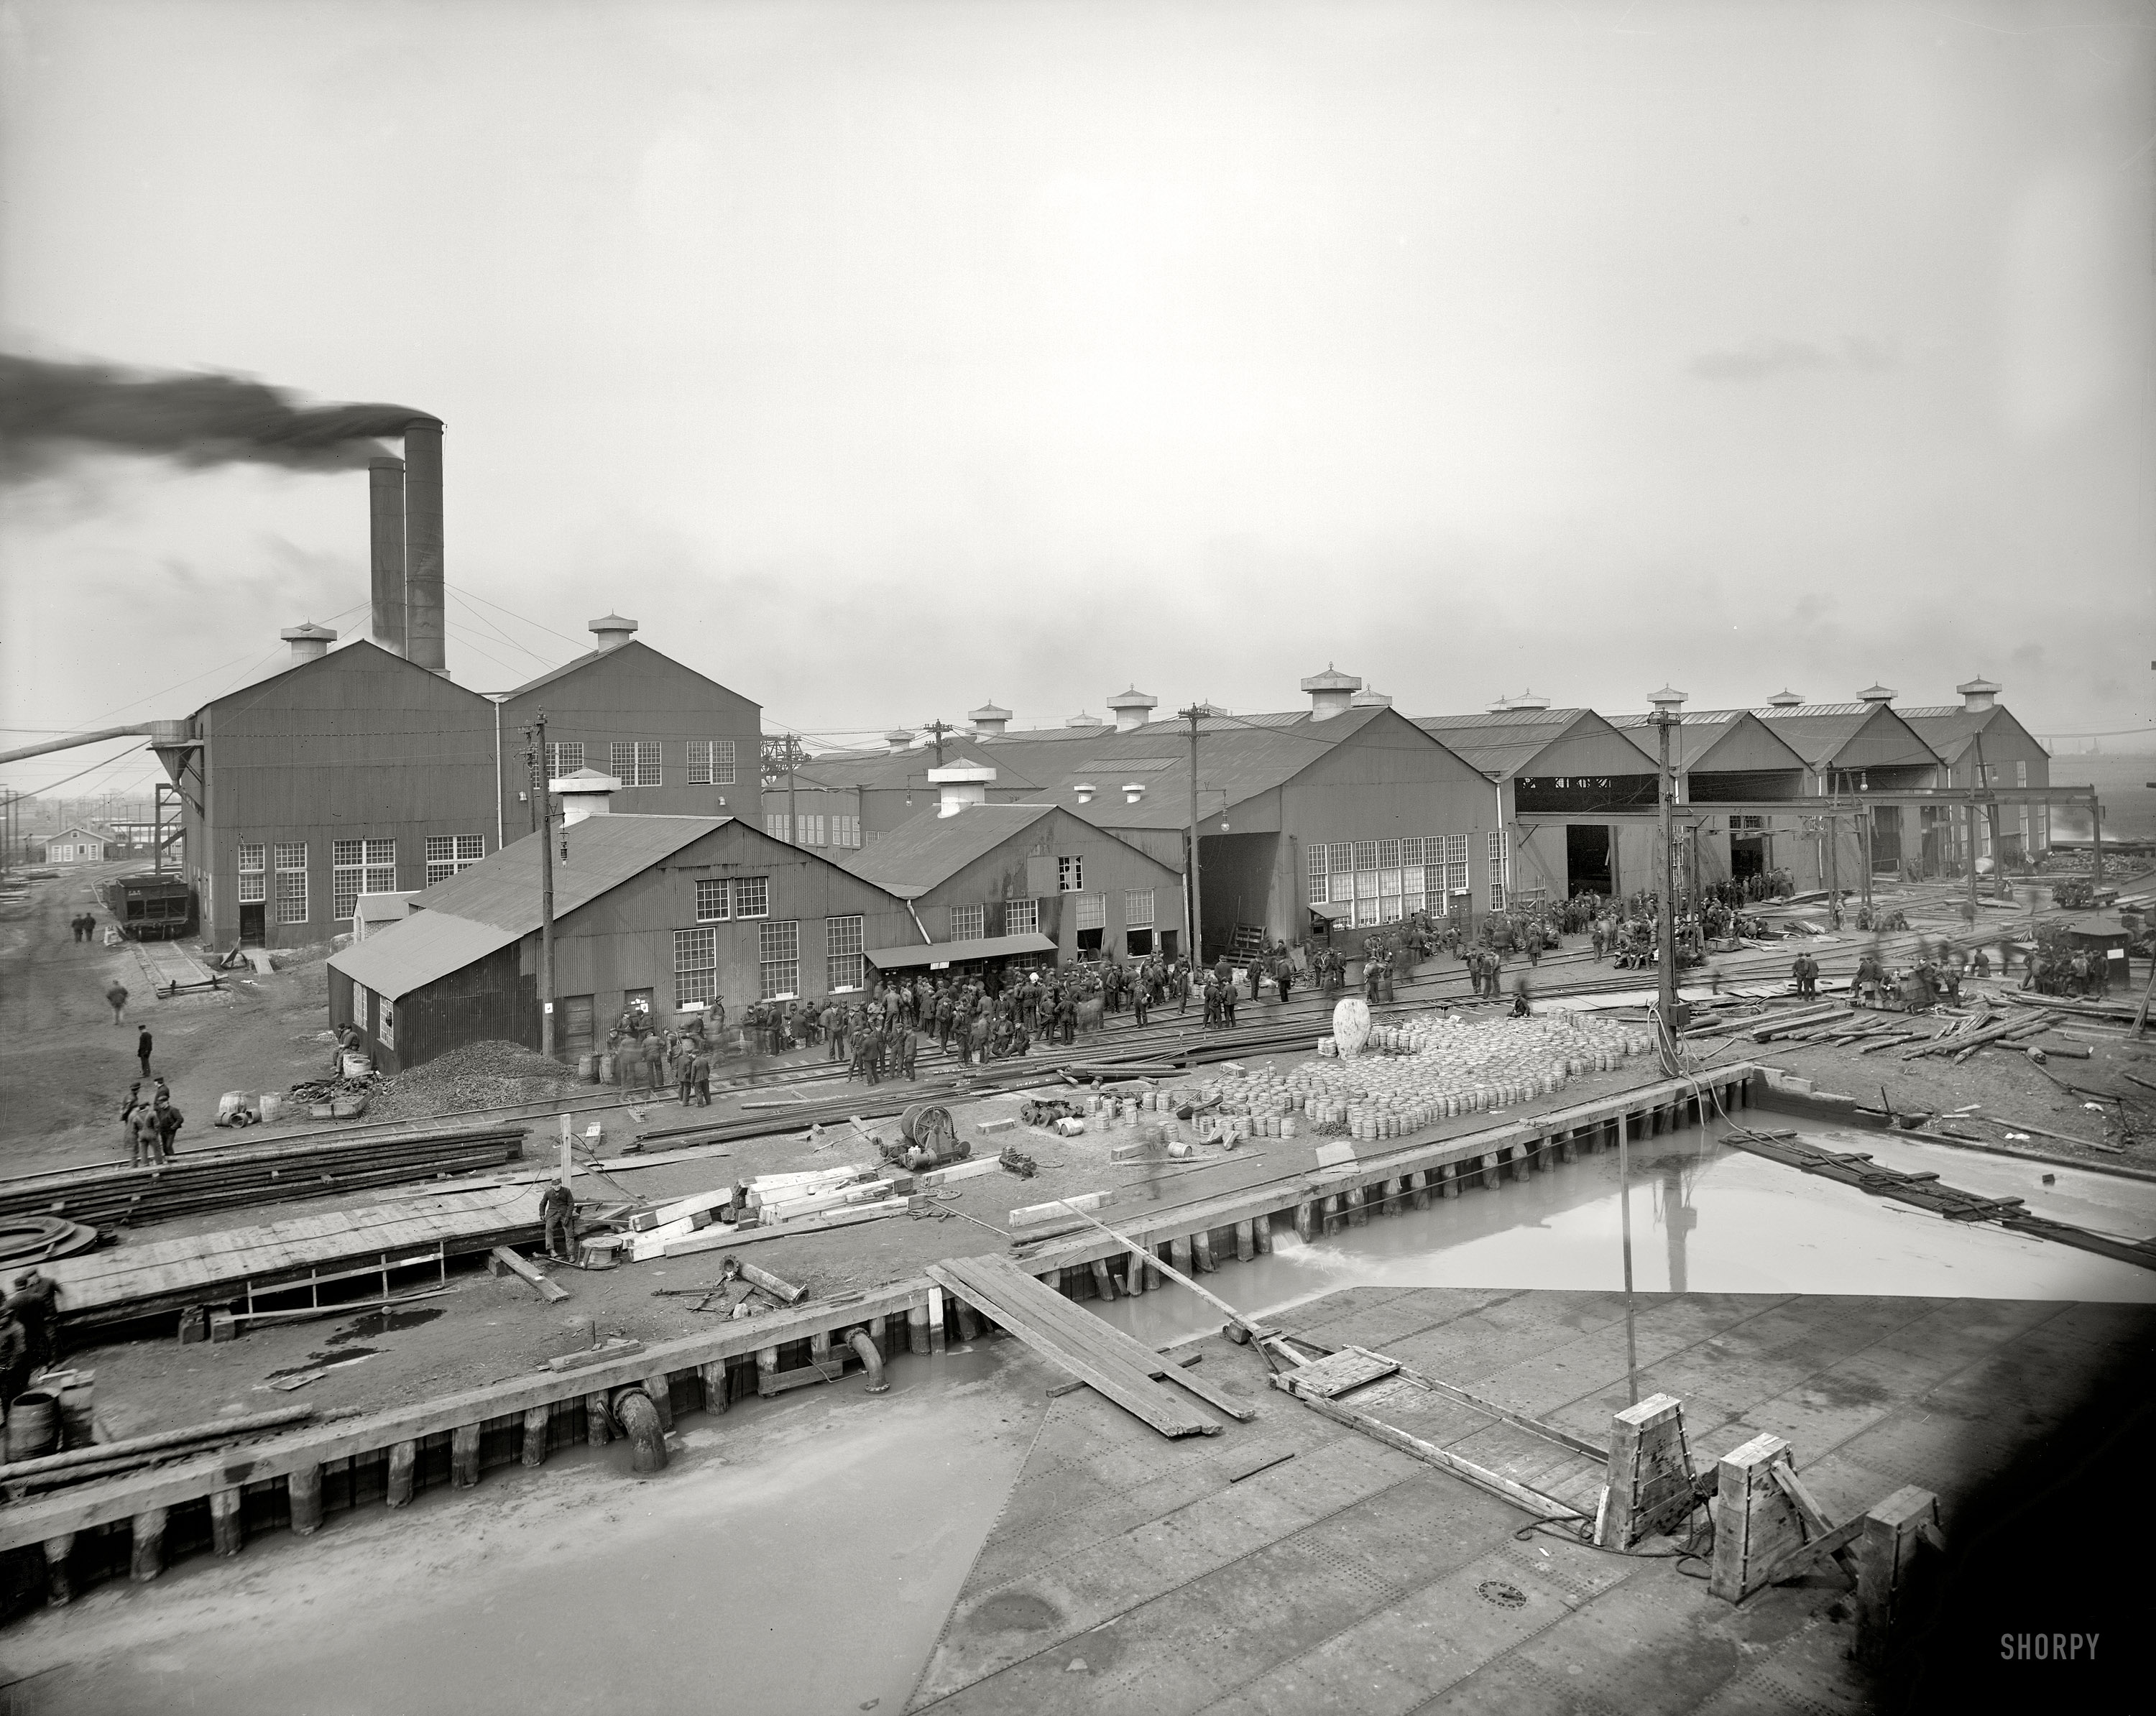 Ecorse, Michigan, circa 1906. "Great Lakes Engineering Works. Some of the shops." Our second look at this gritty shipyard near Detroit. 8x10 inch dry plate glass negative, Detroit Publishing Company. View full size.